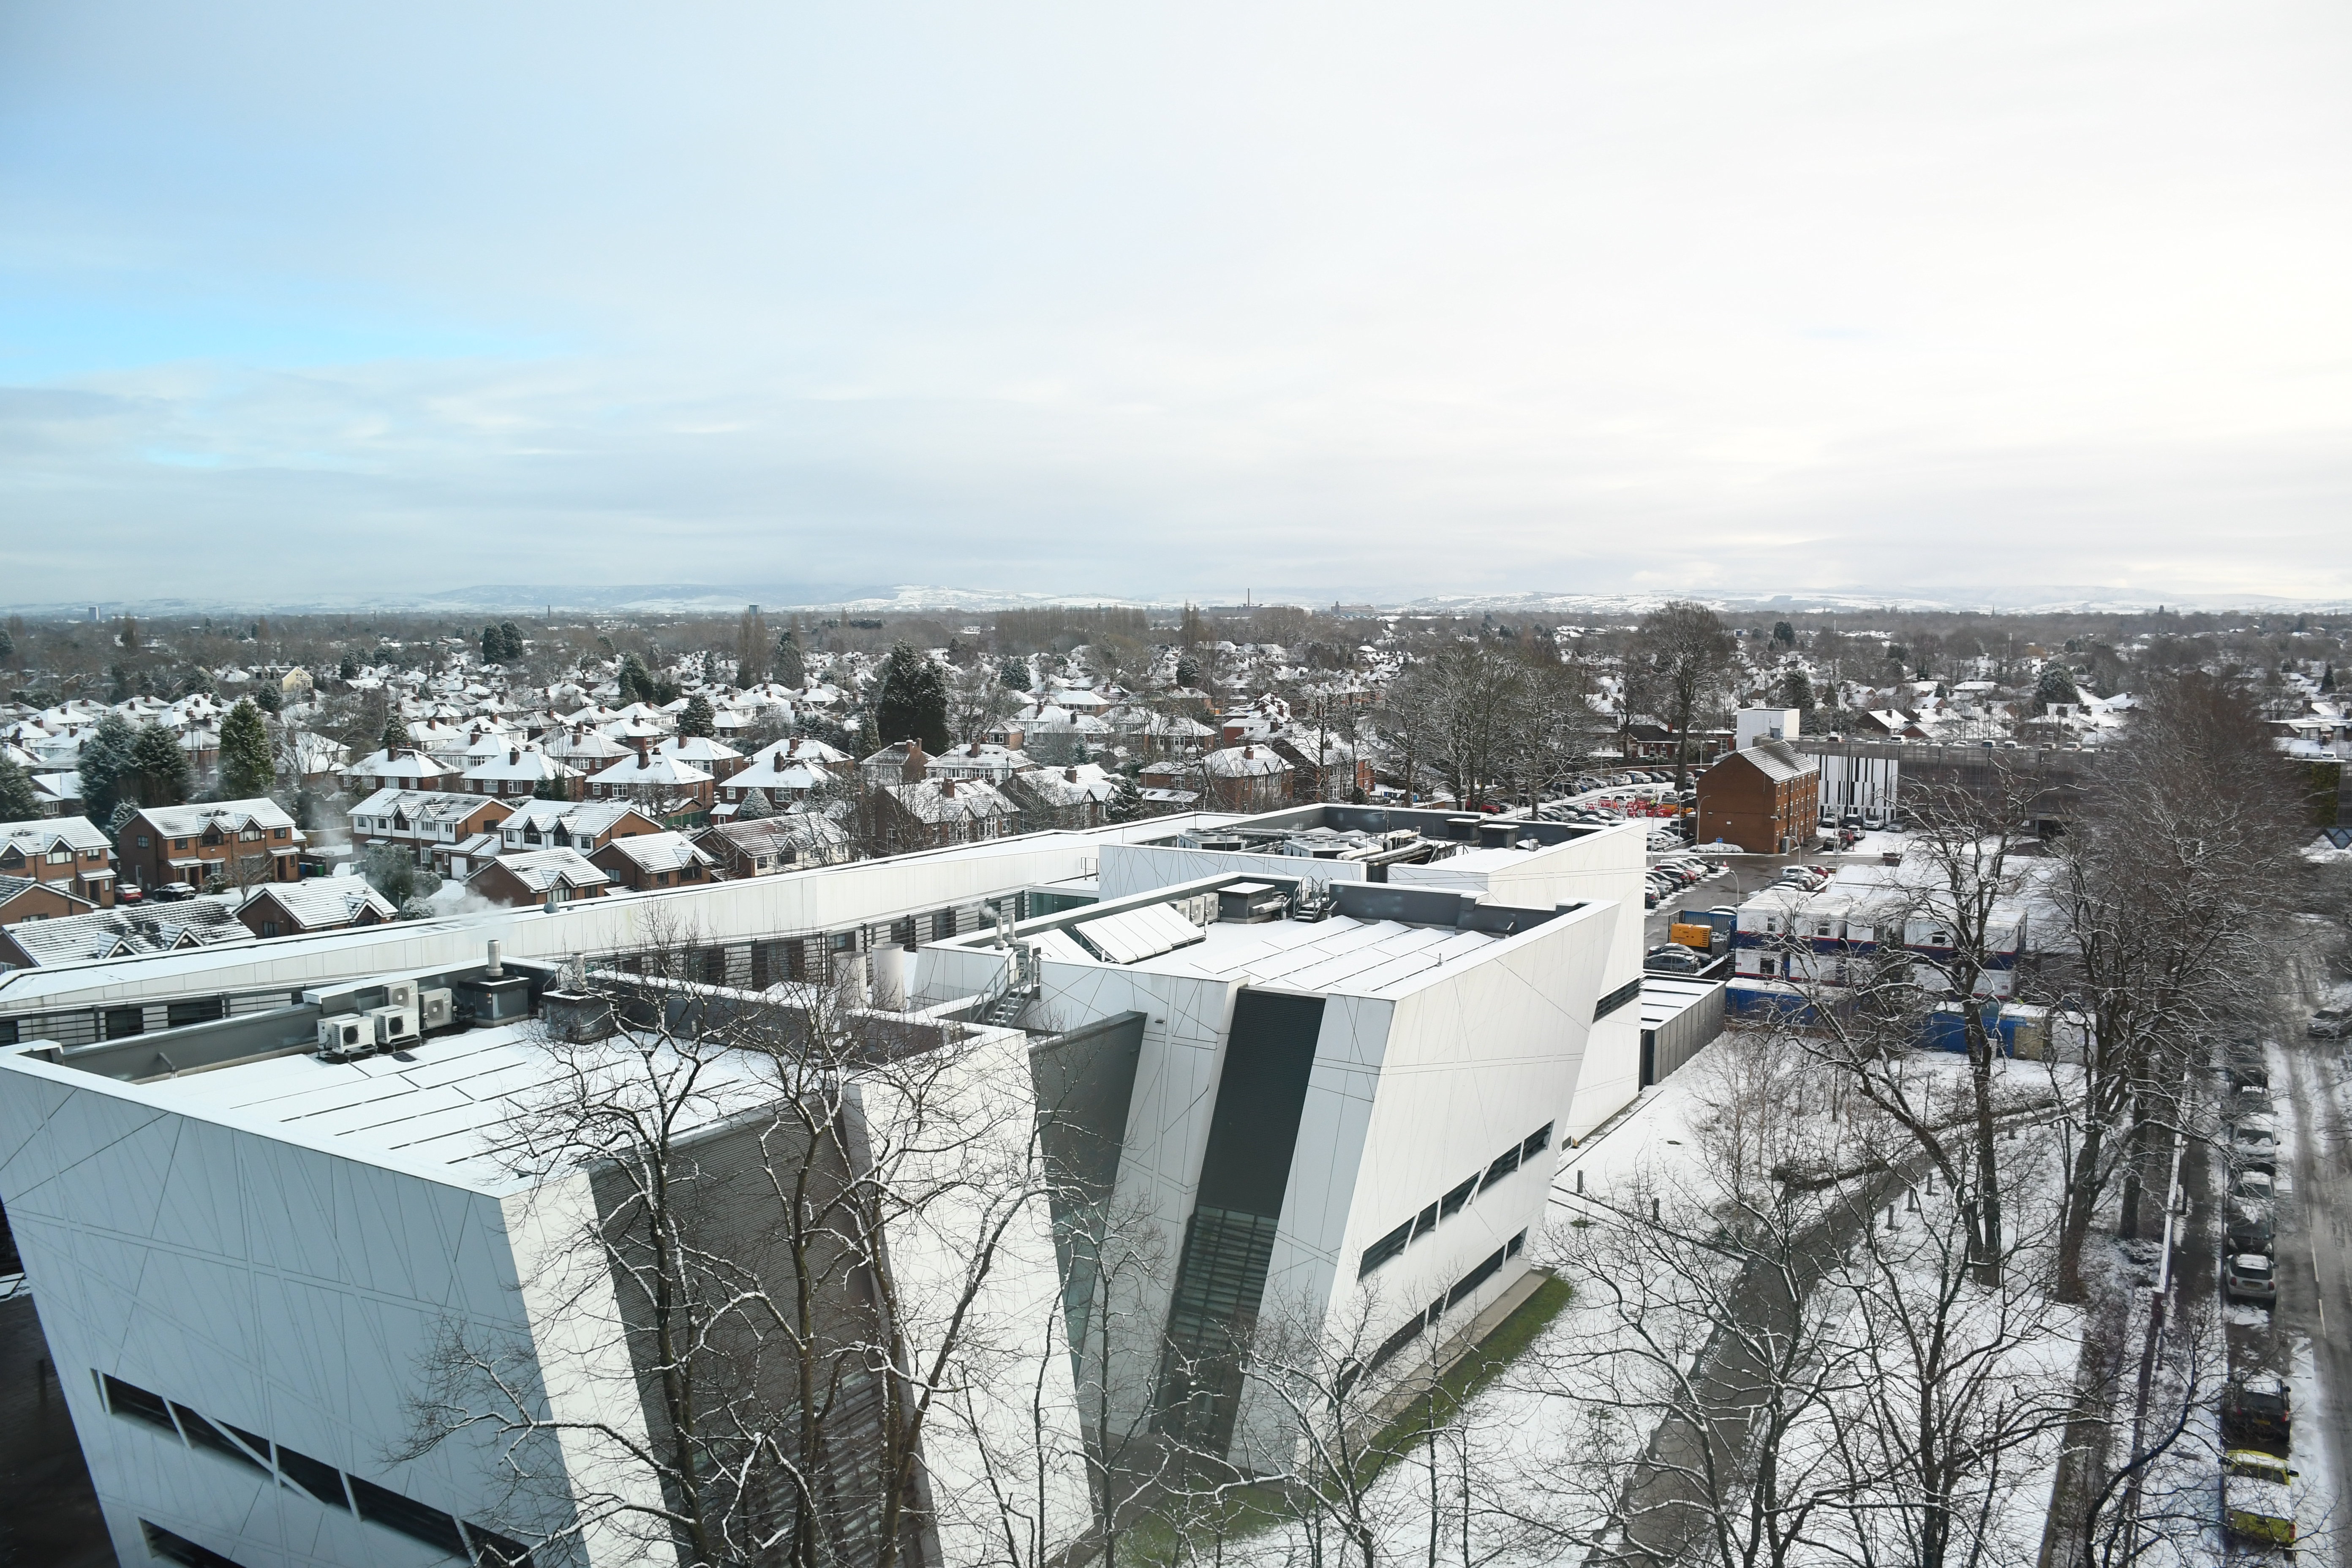 The Oglesby Cancer Research Centre, as seen from the Paterson Building, in the snow